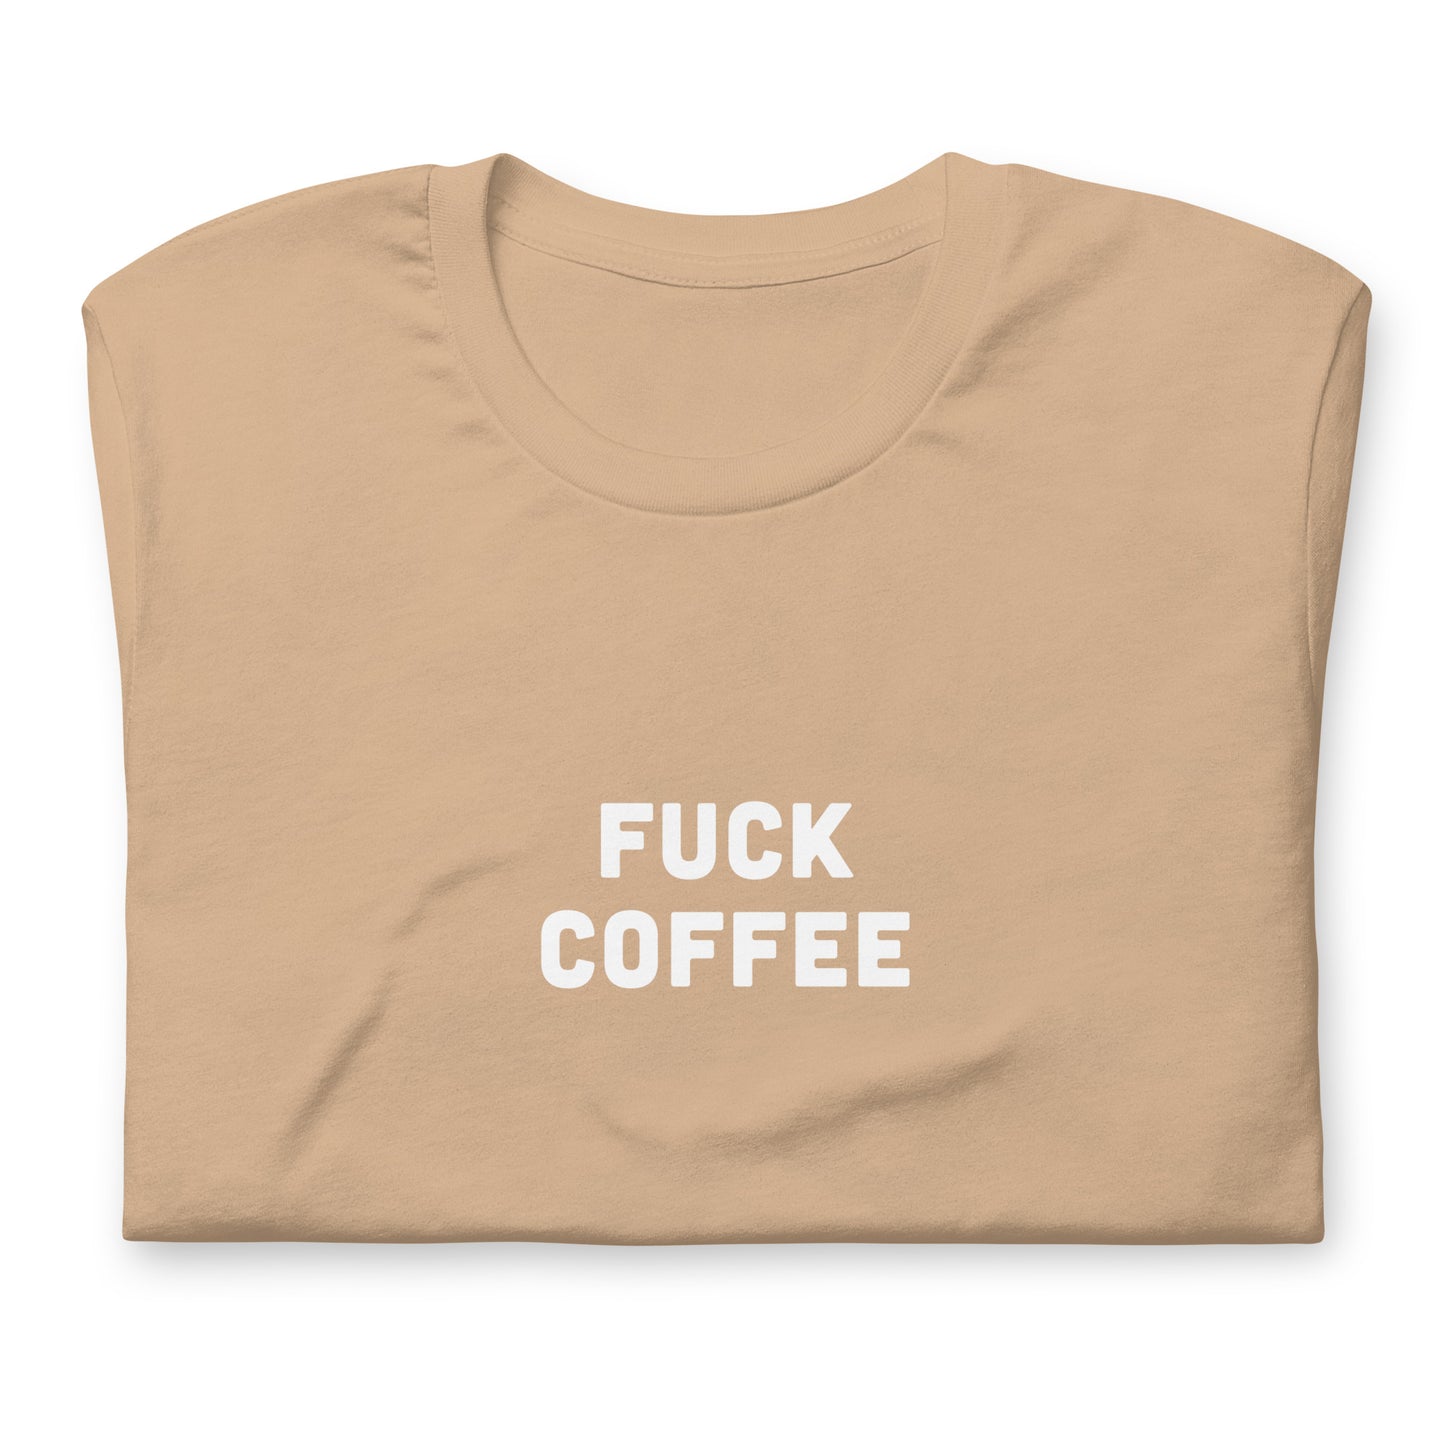 Fuck Coffee T-Shirt Size XL Color Forest